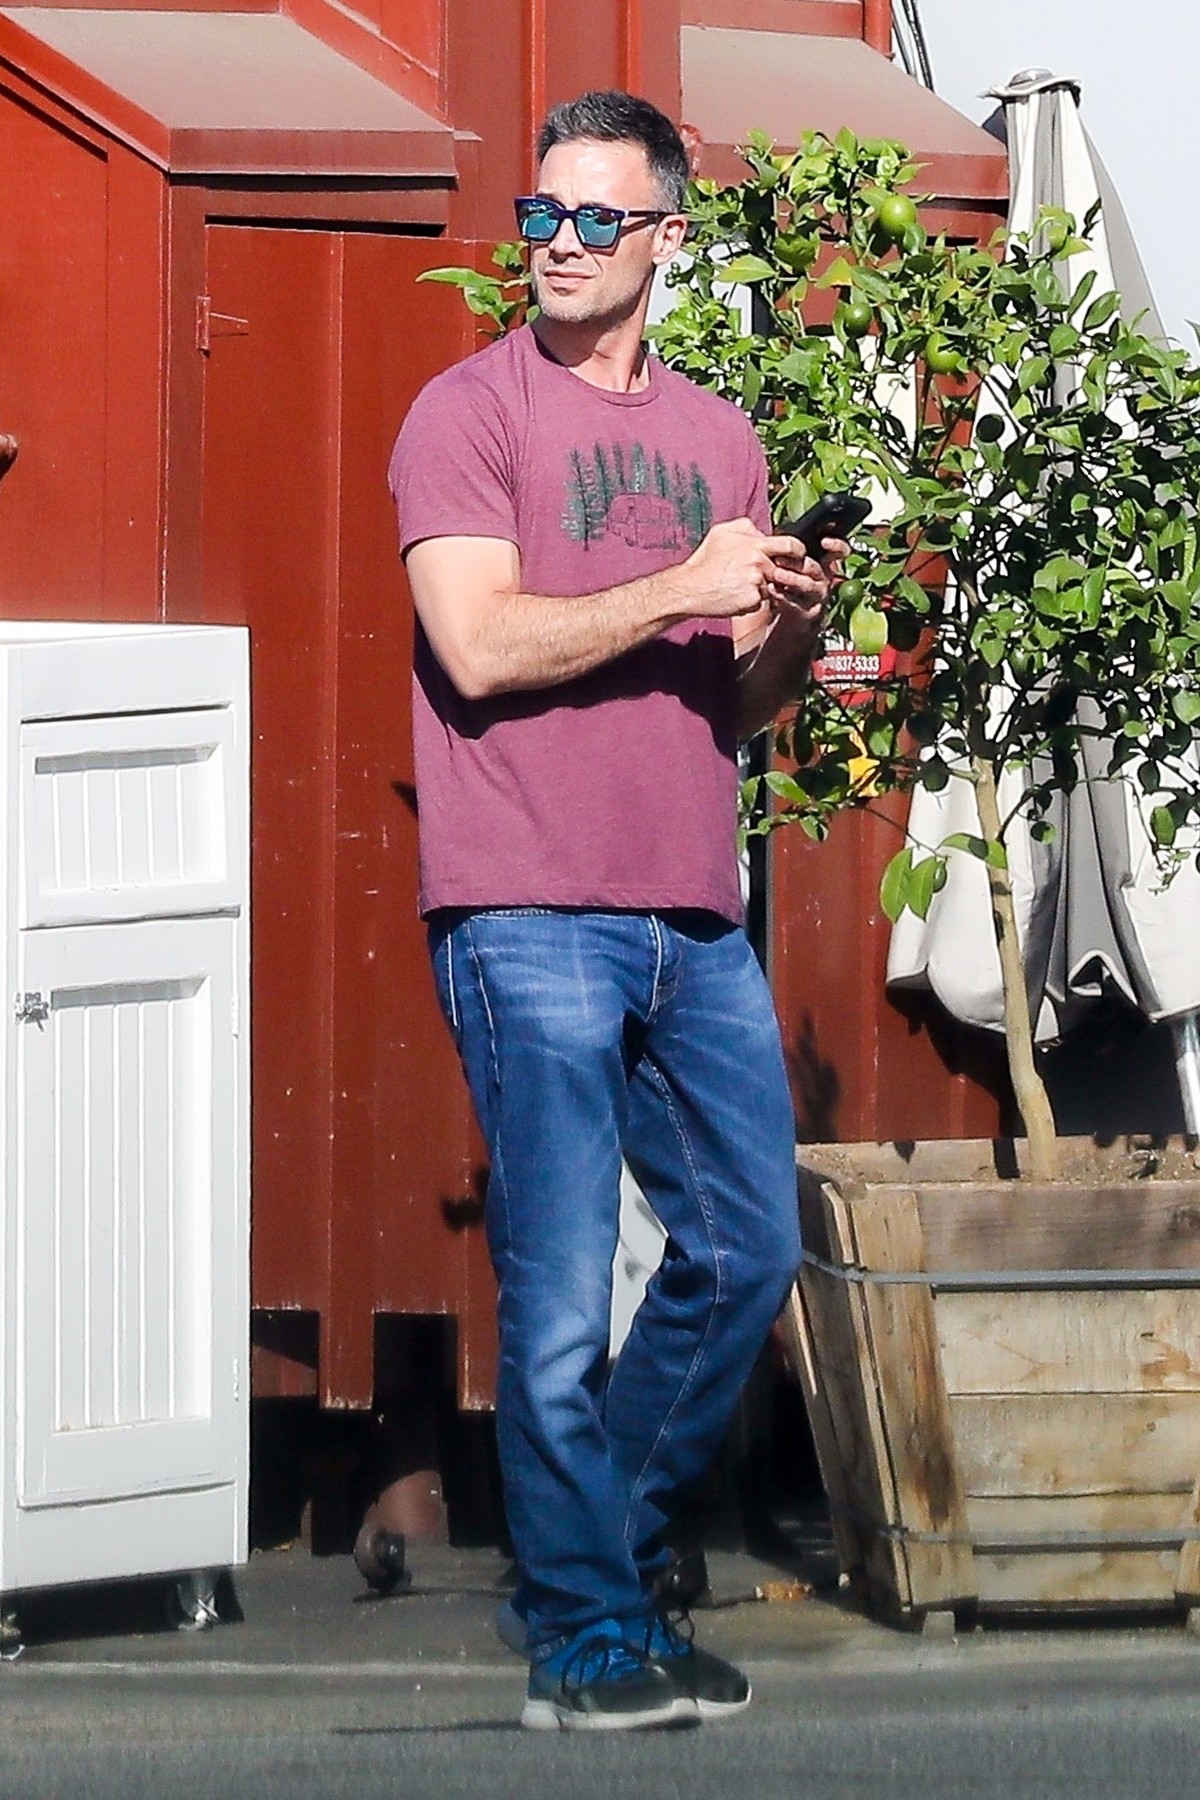 Brentwood, CA  - *EXCLUSIVE*  - Friends Brian Austin Green and Freddie Prinze Jr. meet up for coffee at the Brentwood Country Mart in Brentwood. The pair chatted for a few minutes in the parking lot before giving each other a hug and heading on their way.

Pictured: Freddie Prinze Jr.

BACKGRID USA 18 OCTOBER 2017,Image: 353350603, License: Rights-managed, Restrictions: , Model Release: no, Credit line: SPOT / BACKGRID / Backgrid USA / Profimedia